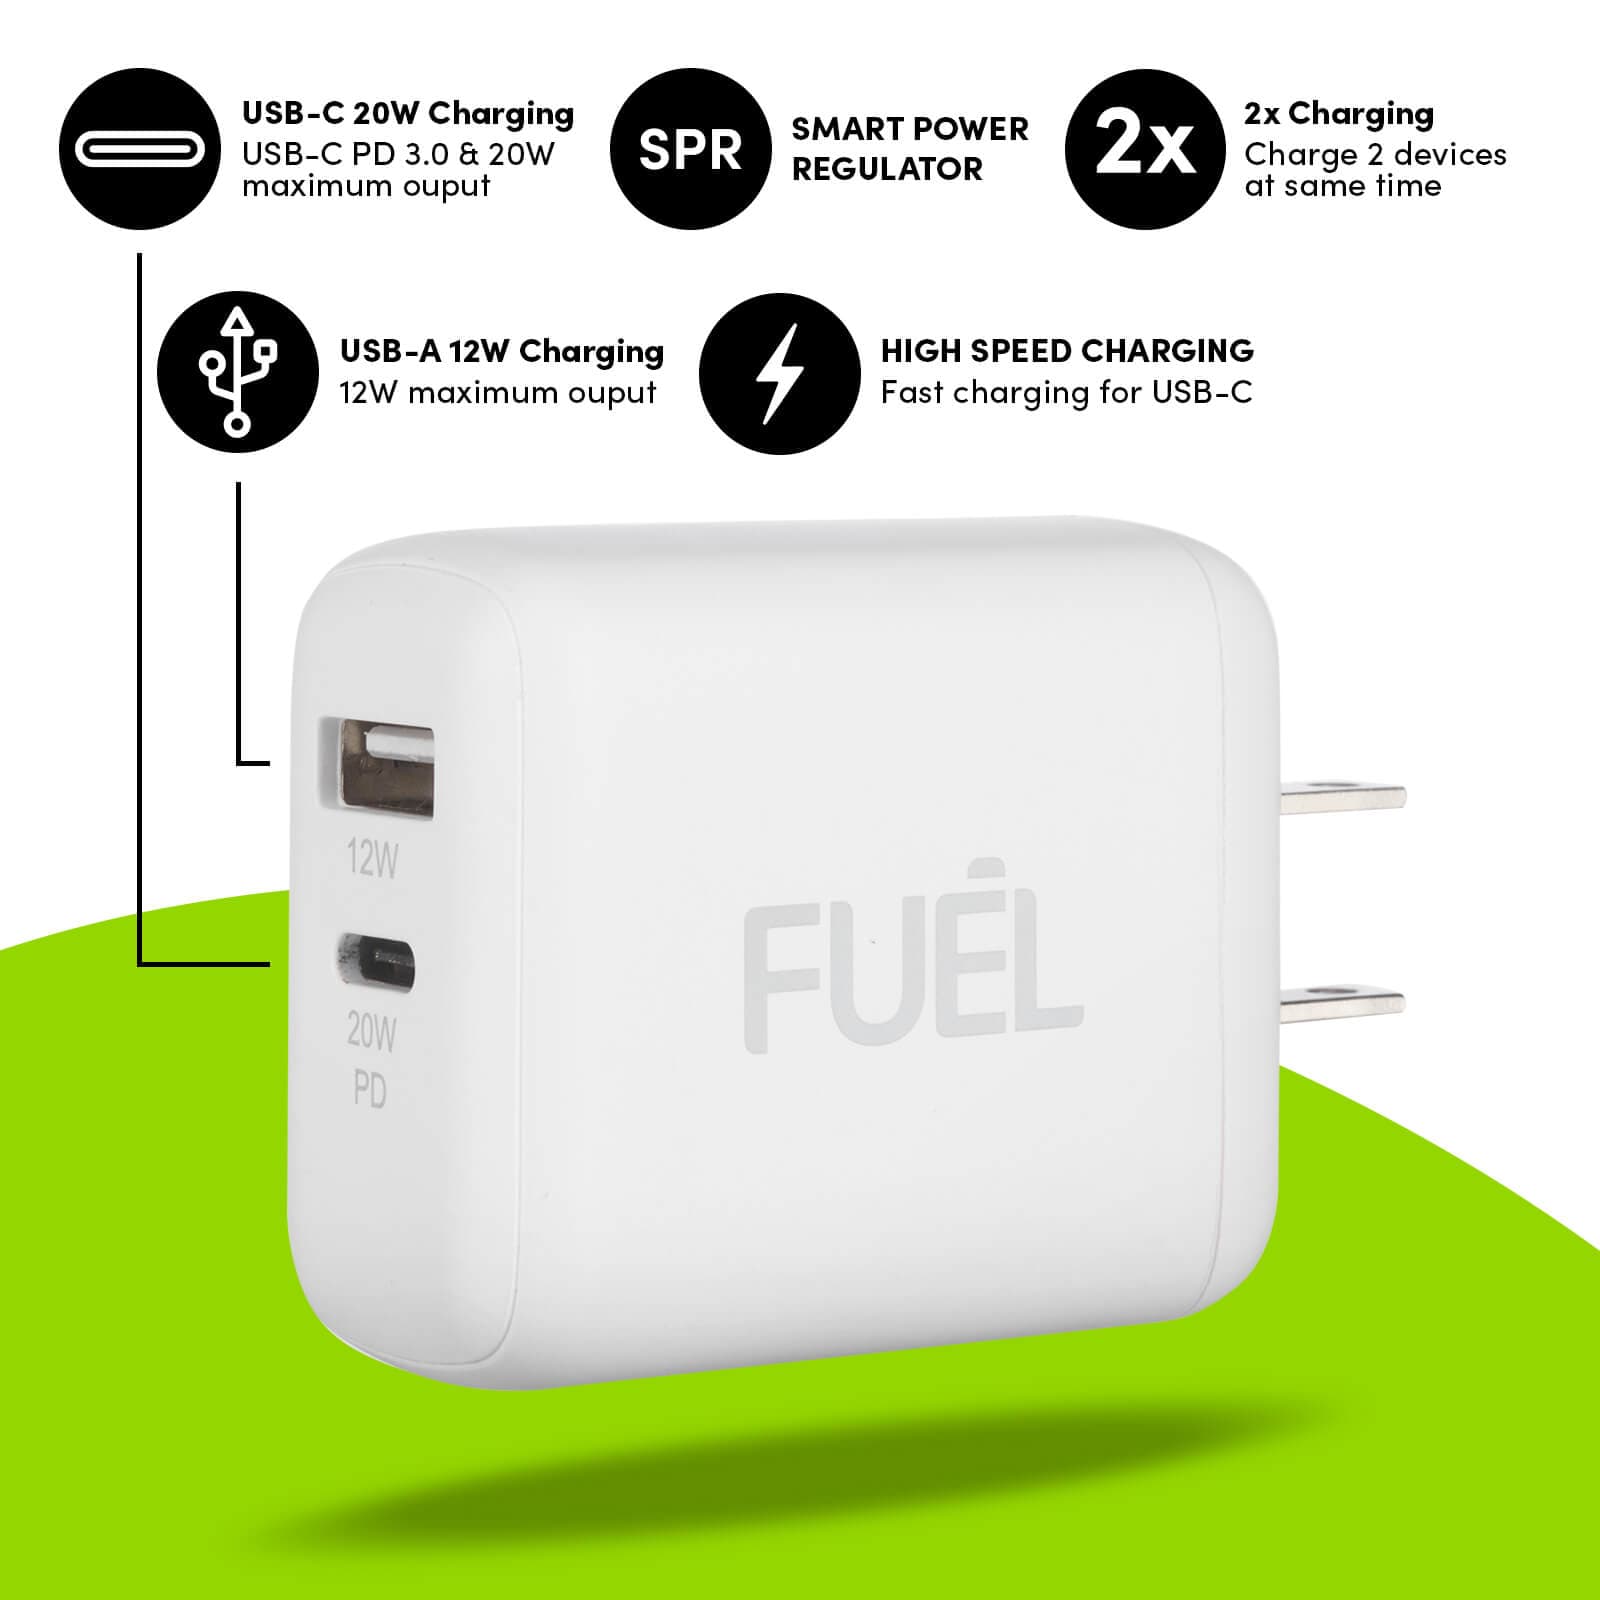 USB-C 20W Chargin. USB-c PD 3.0 & 20W maximum output. Smart Power Regulator. 2x Charging. Charge 2 devices at the same time. USB-A 12W Charging 12 W maximum output. High Speed Charging. Fast charging for USB-C. color::White